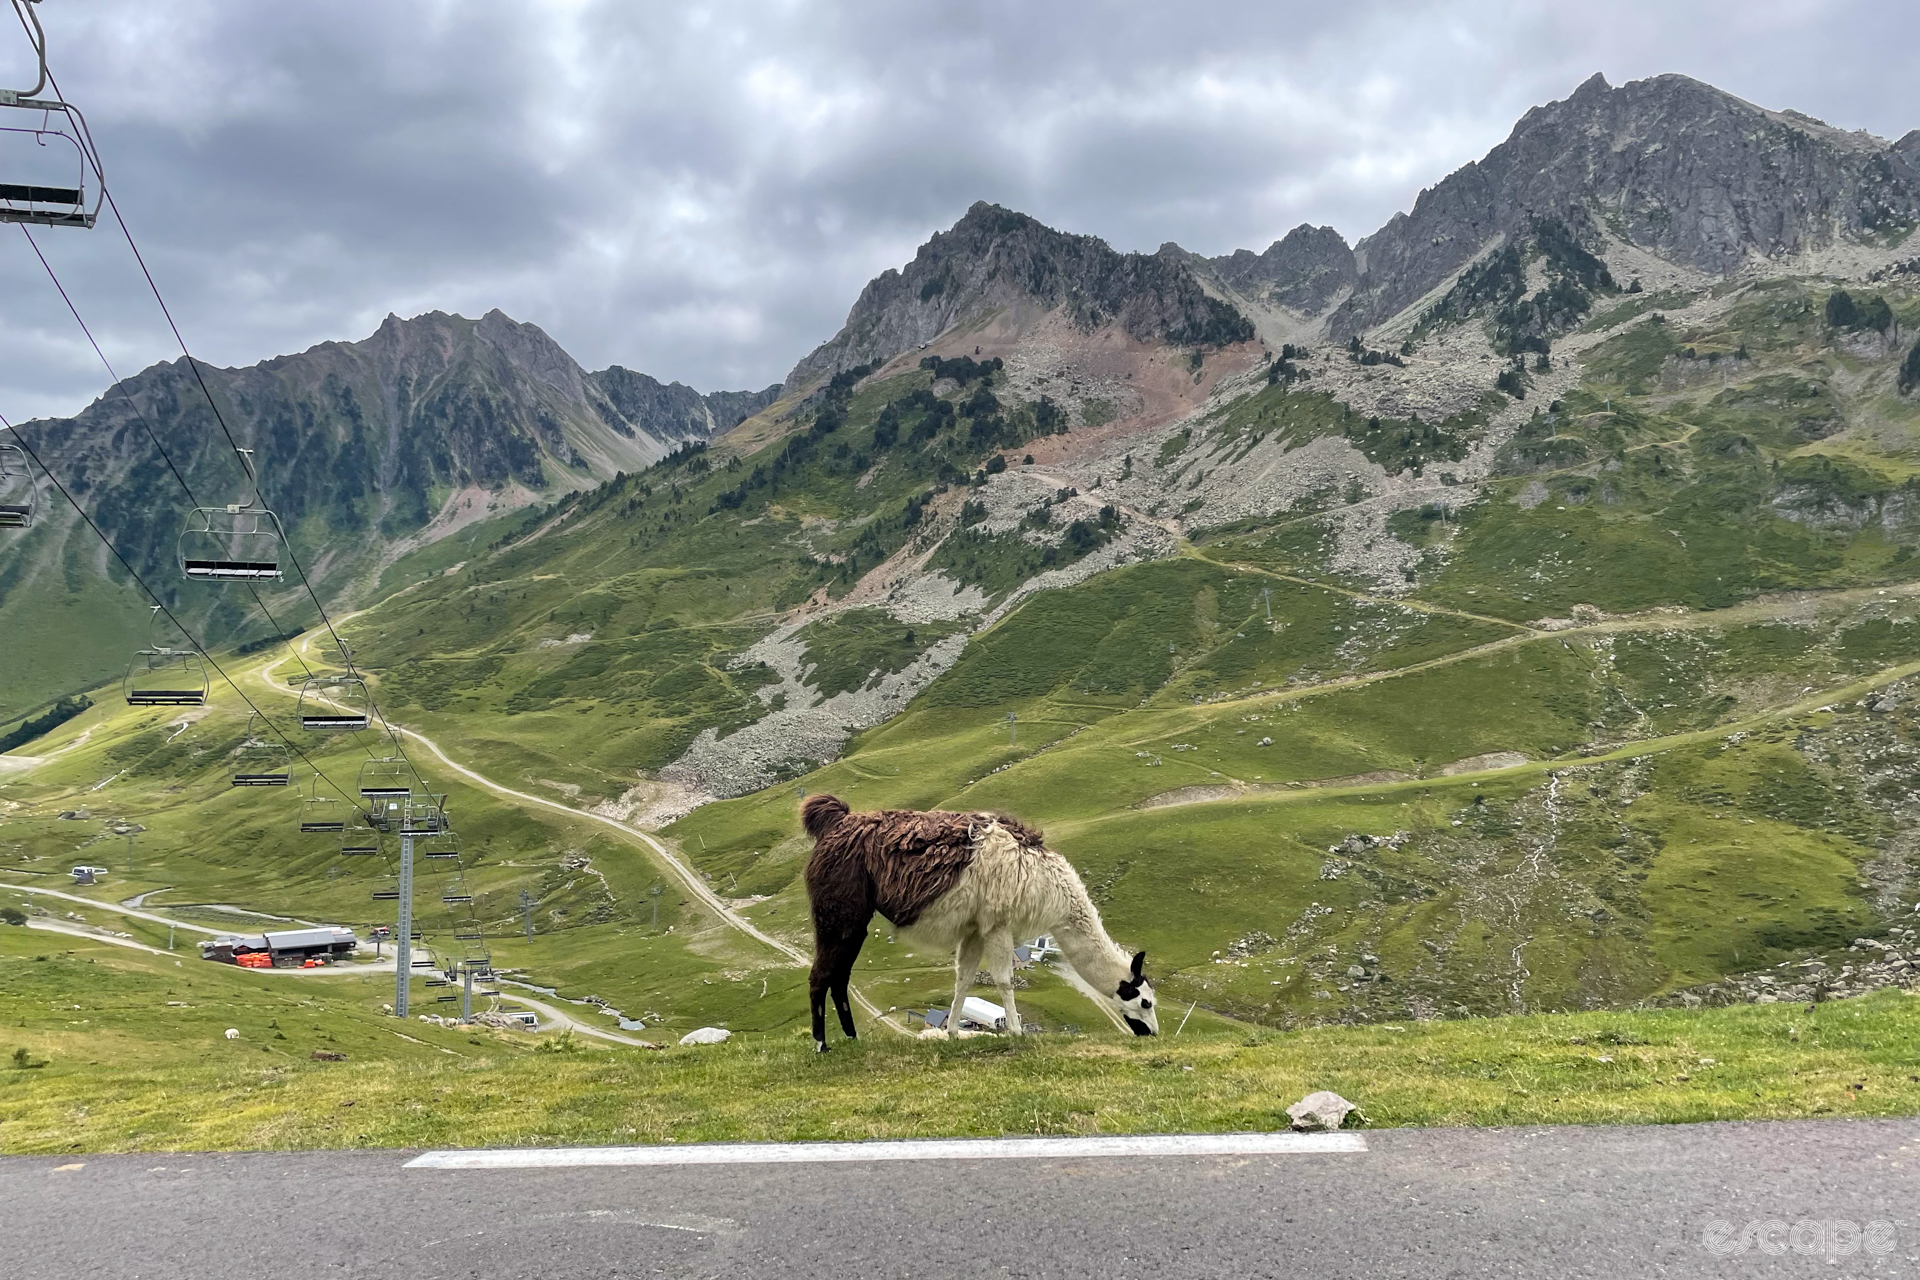 A llama (or maybe alpaca) grazes next to the roadside underneath a ski lift. Peaks rise in the background, their slopes criss-crossed by dirt access roads.